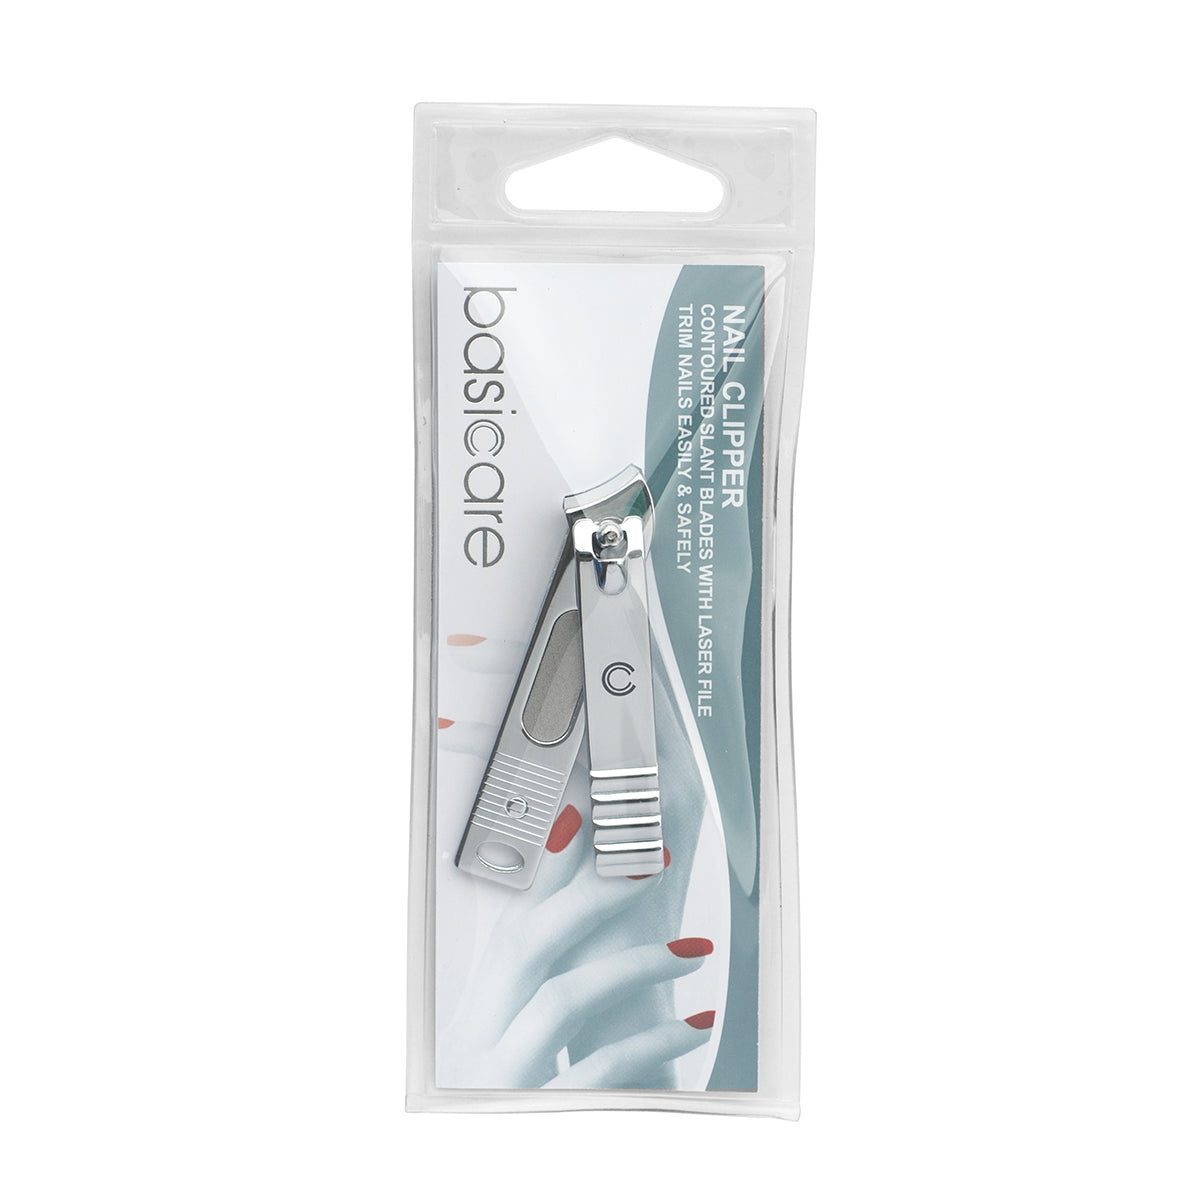 Basicare Stainless Steel Slant-Curved Blade Nail Clipper (7616125436128)